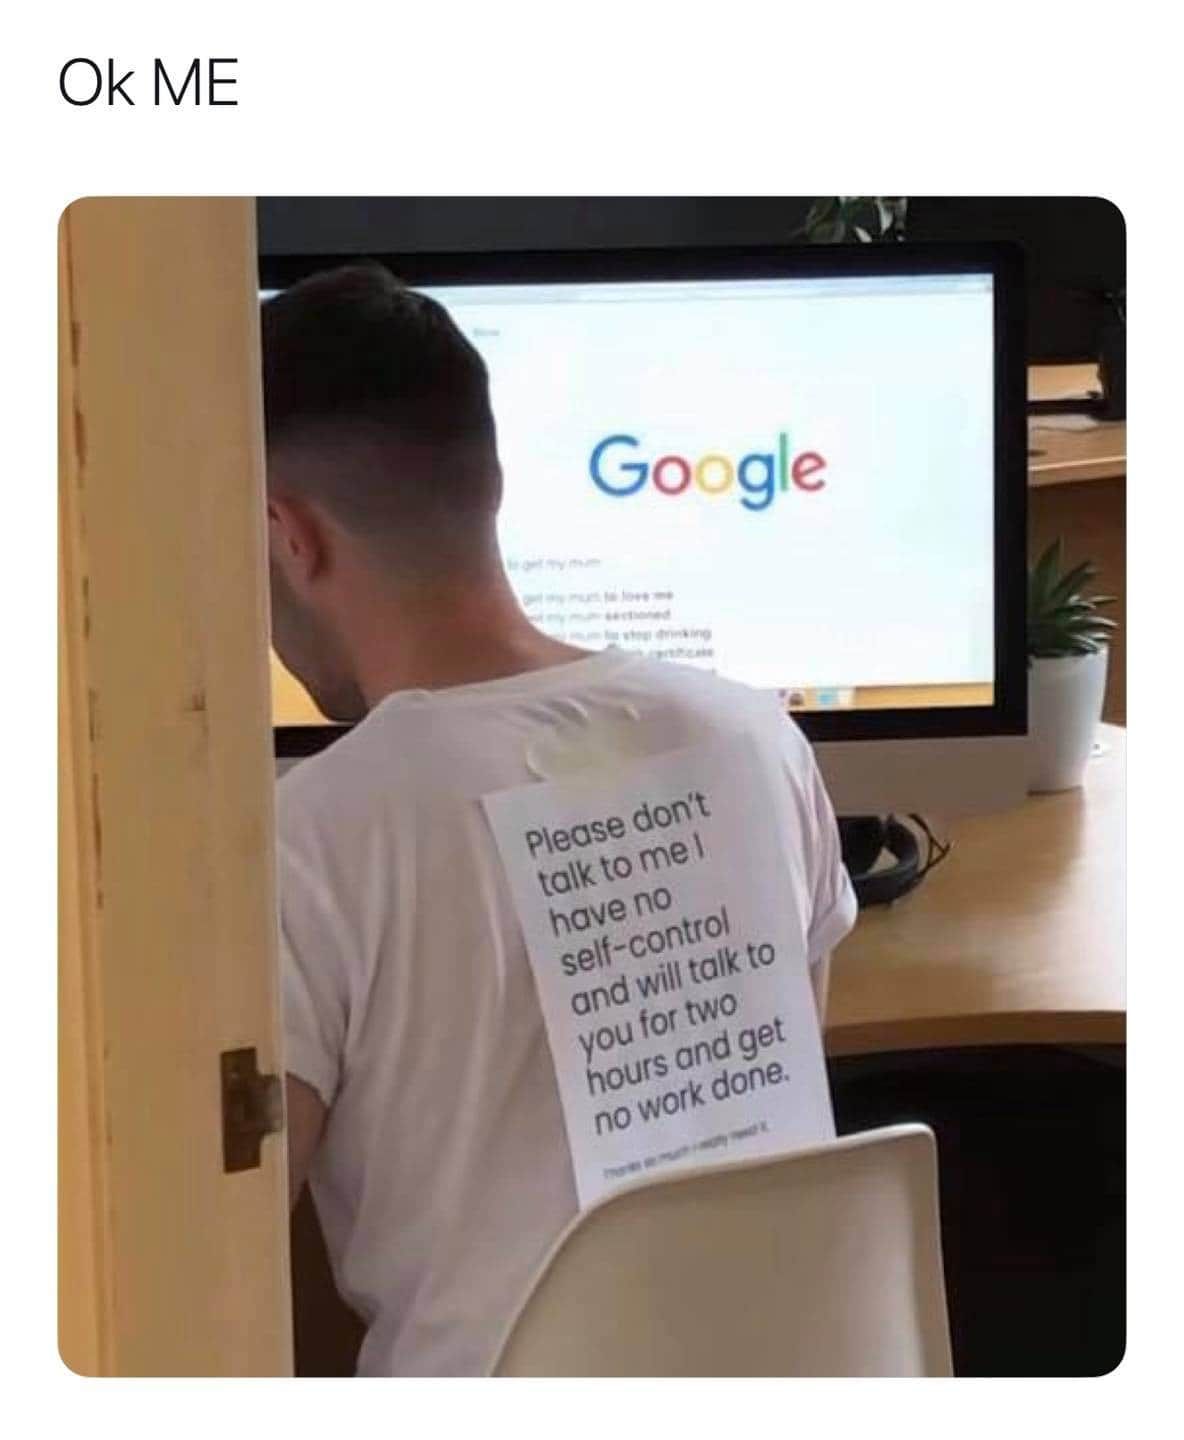 I've always focused on his shirt, but the Google search is a gem. "How to get my mum" And the suggestions are: 1. to love me, 3. to stop drinking, and the second one I can't read. Golden.